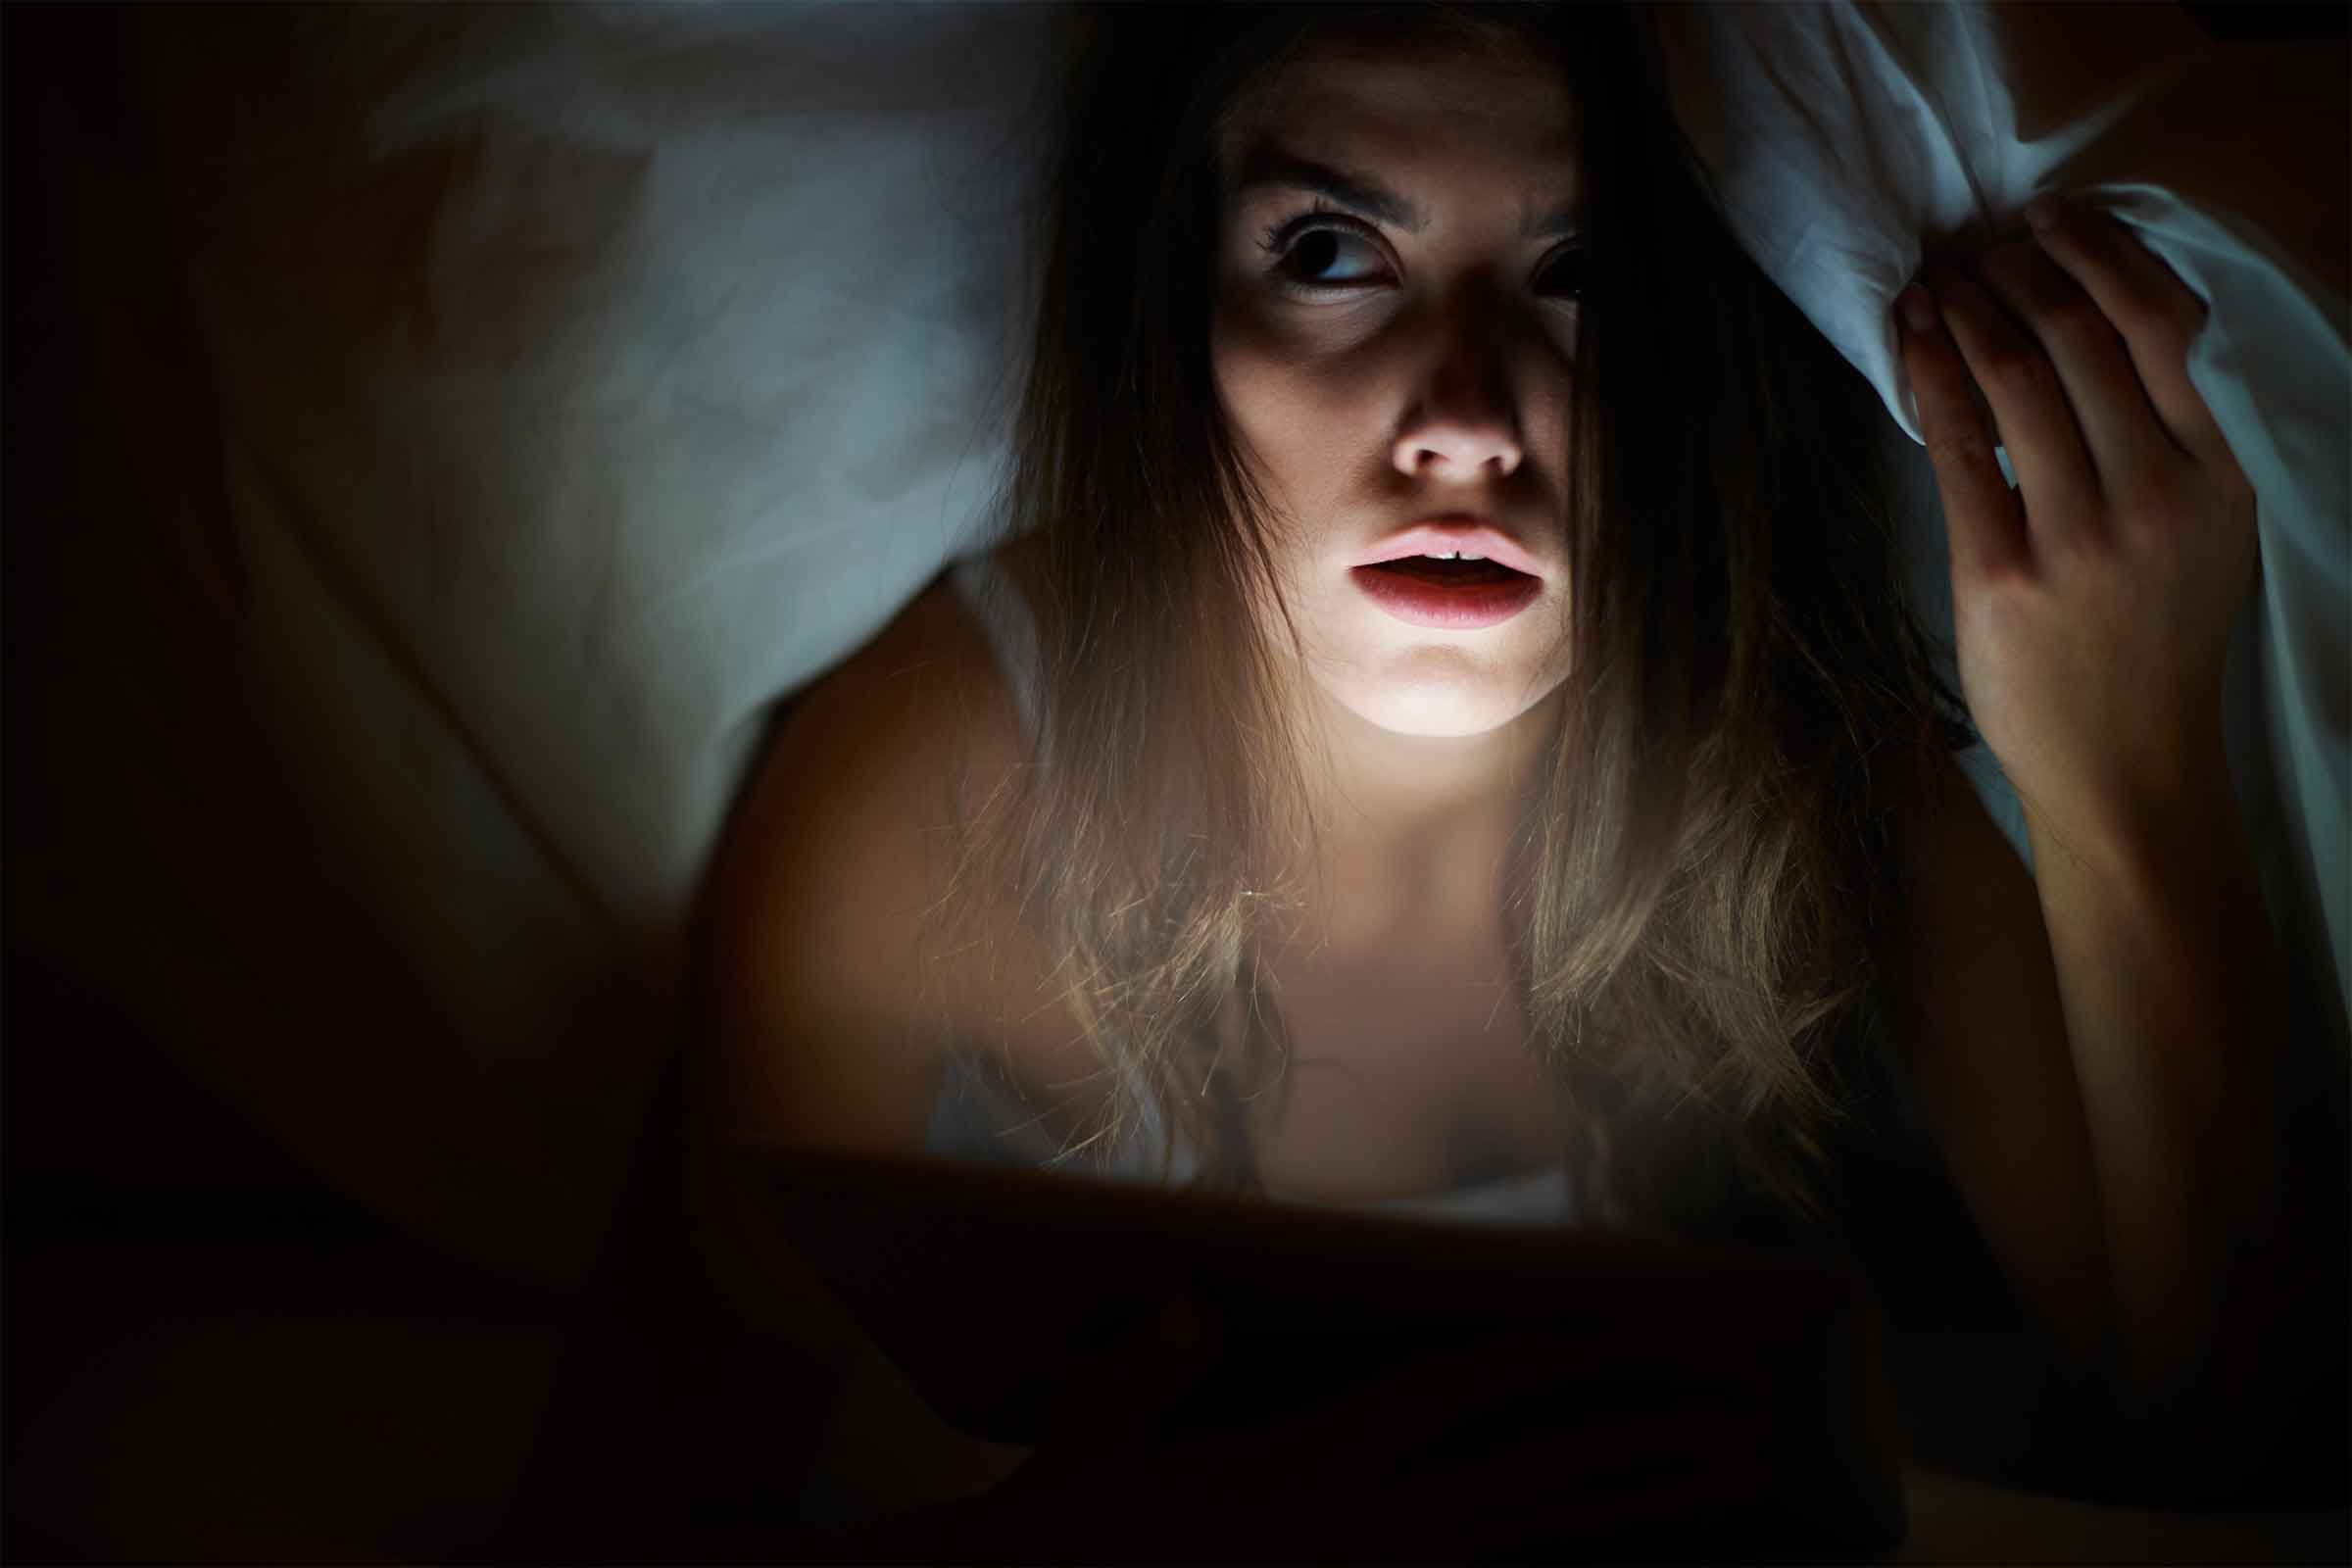 How Getting Scared Is Good for Your Health